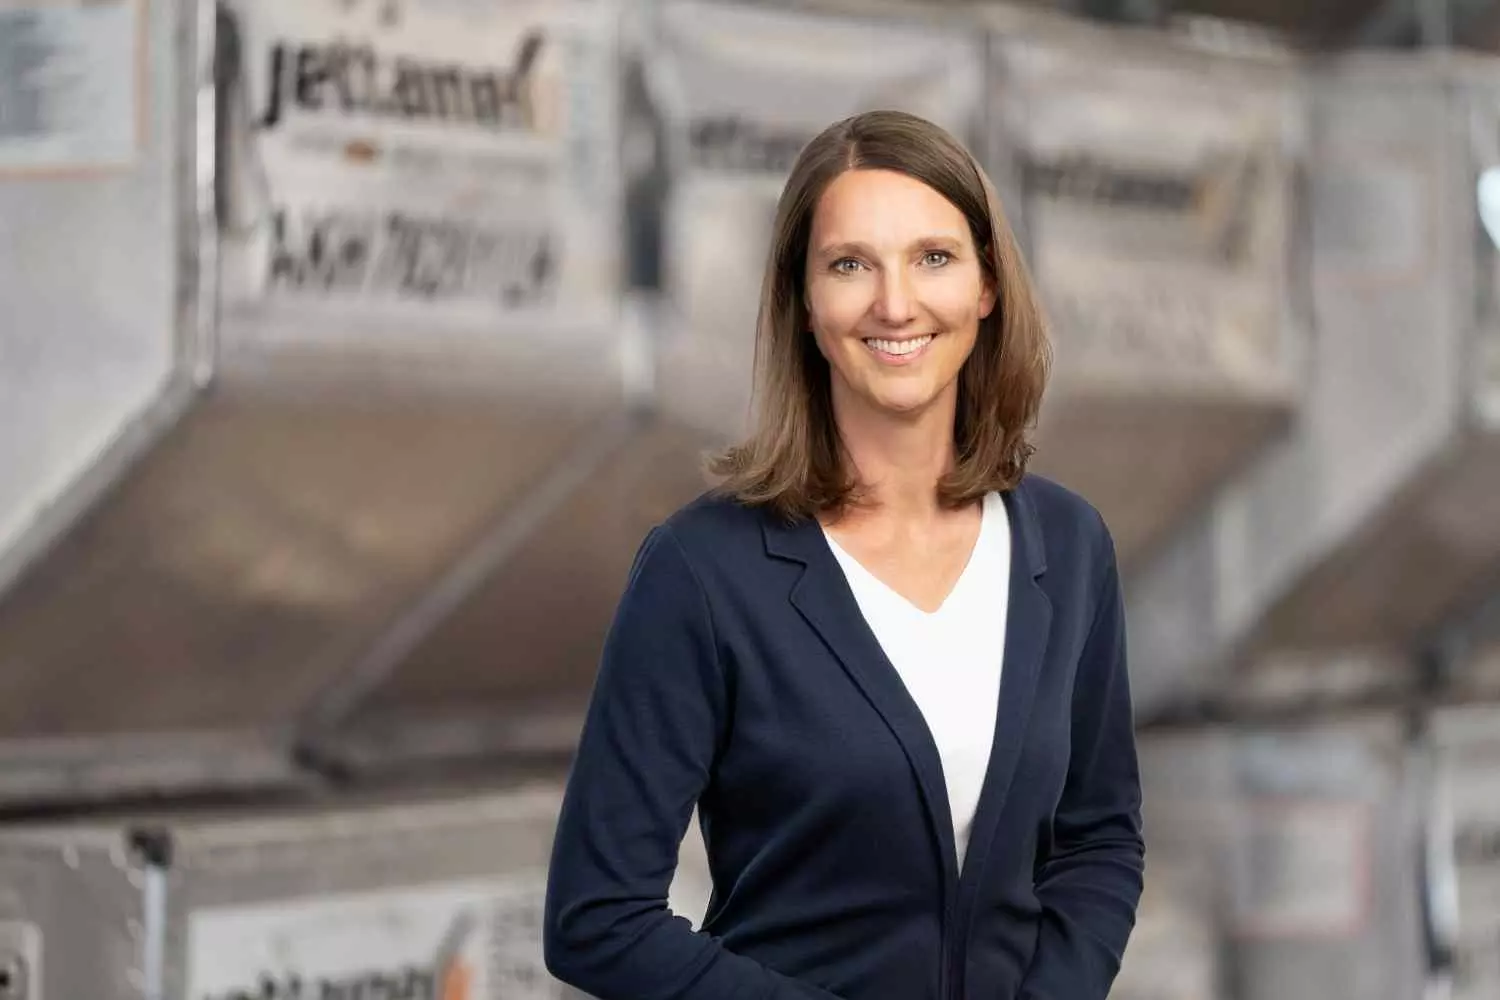 Jettainer appoints Svenia Iriarte as its new CFO